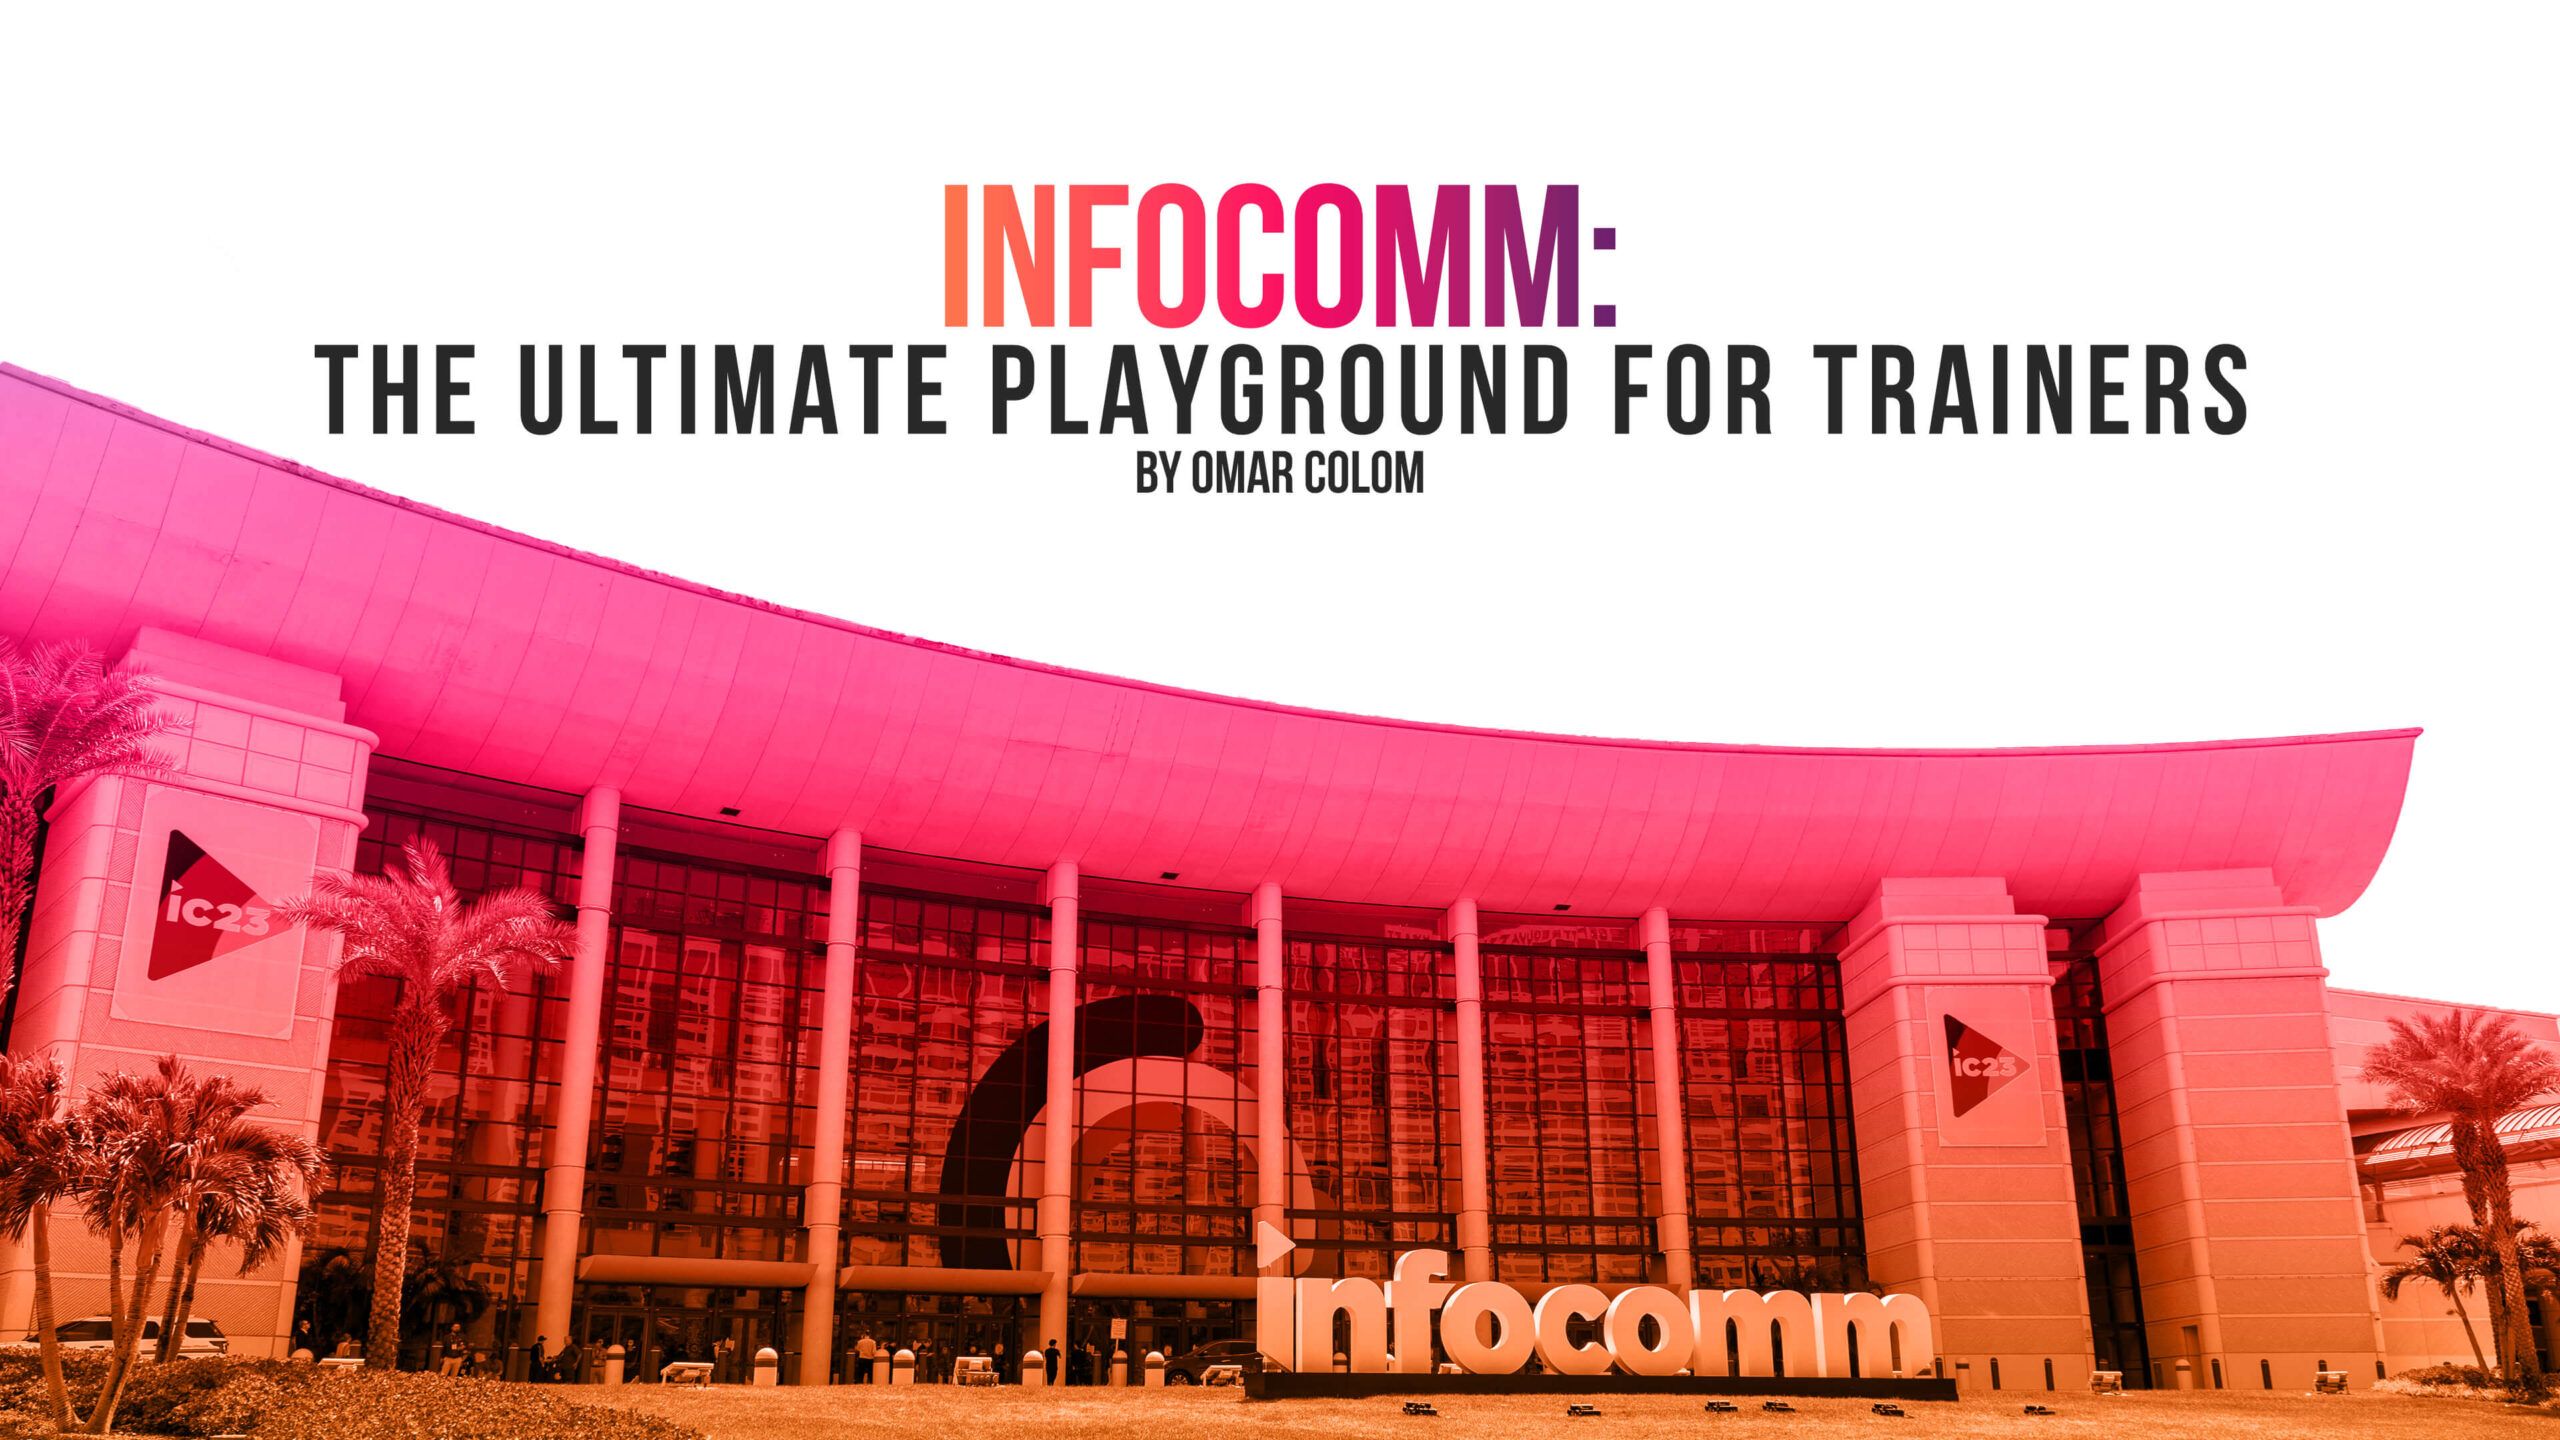 Infocomm the ultimate playground for trainers.